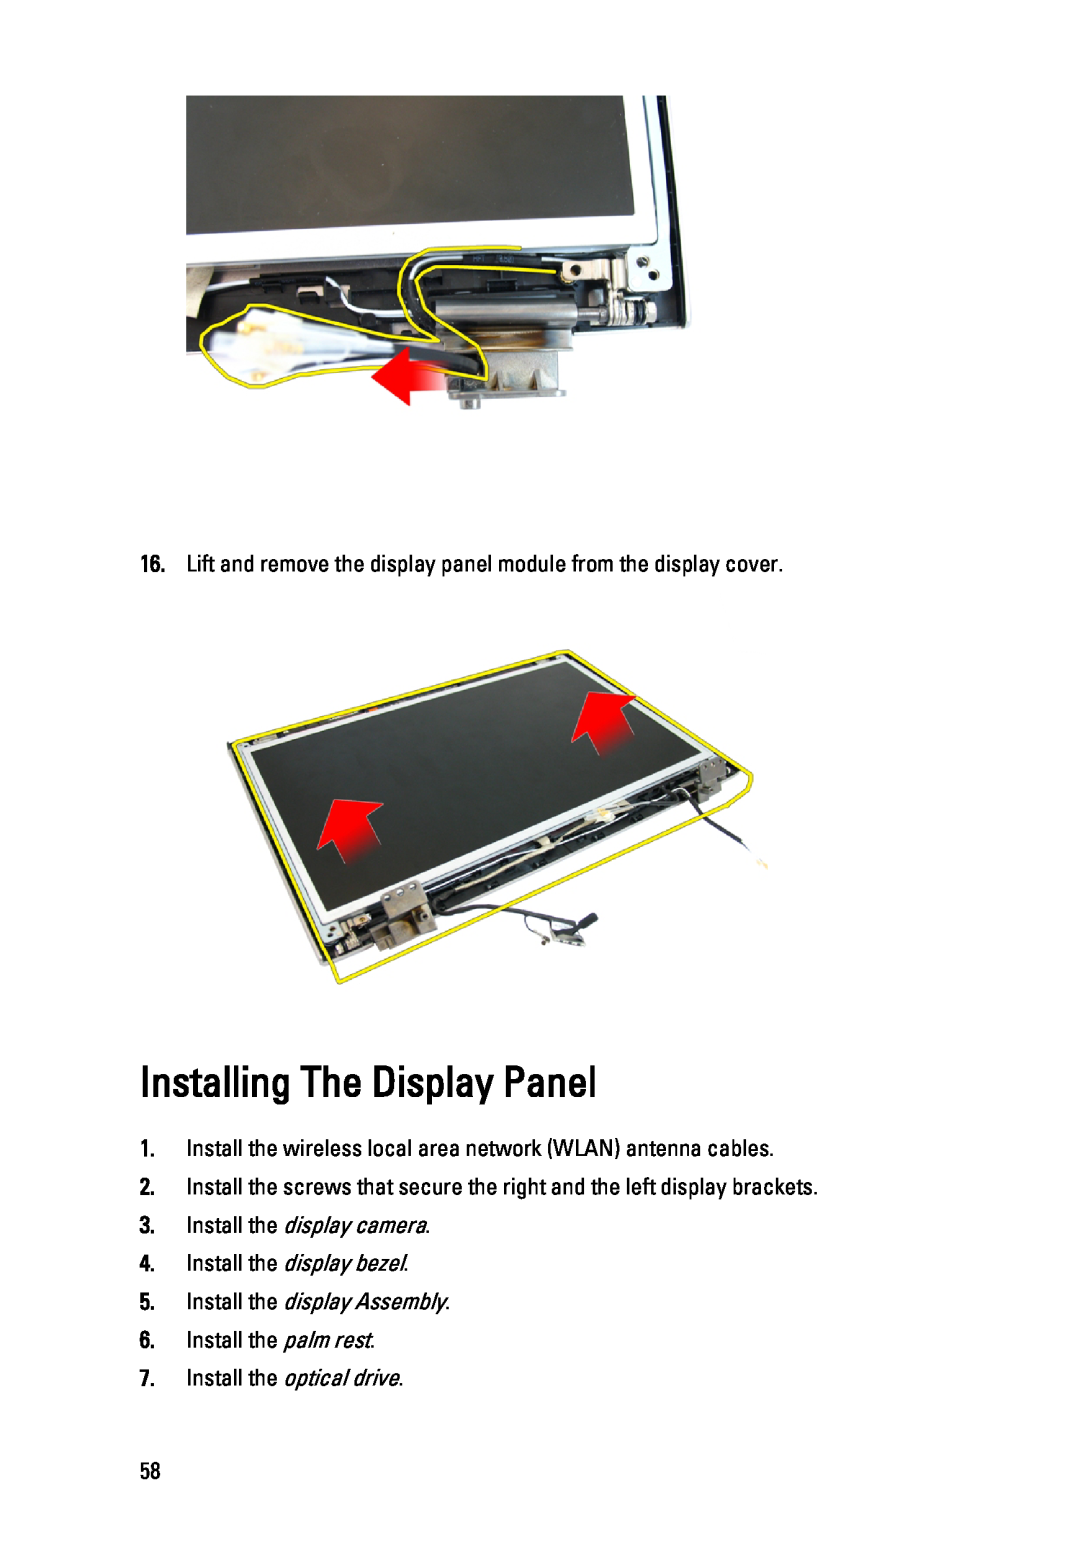 Dell 3450 owner manual Installing The Display Panel, Lift and remove the display panel module from the display cover 